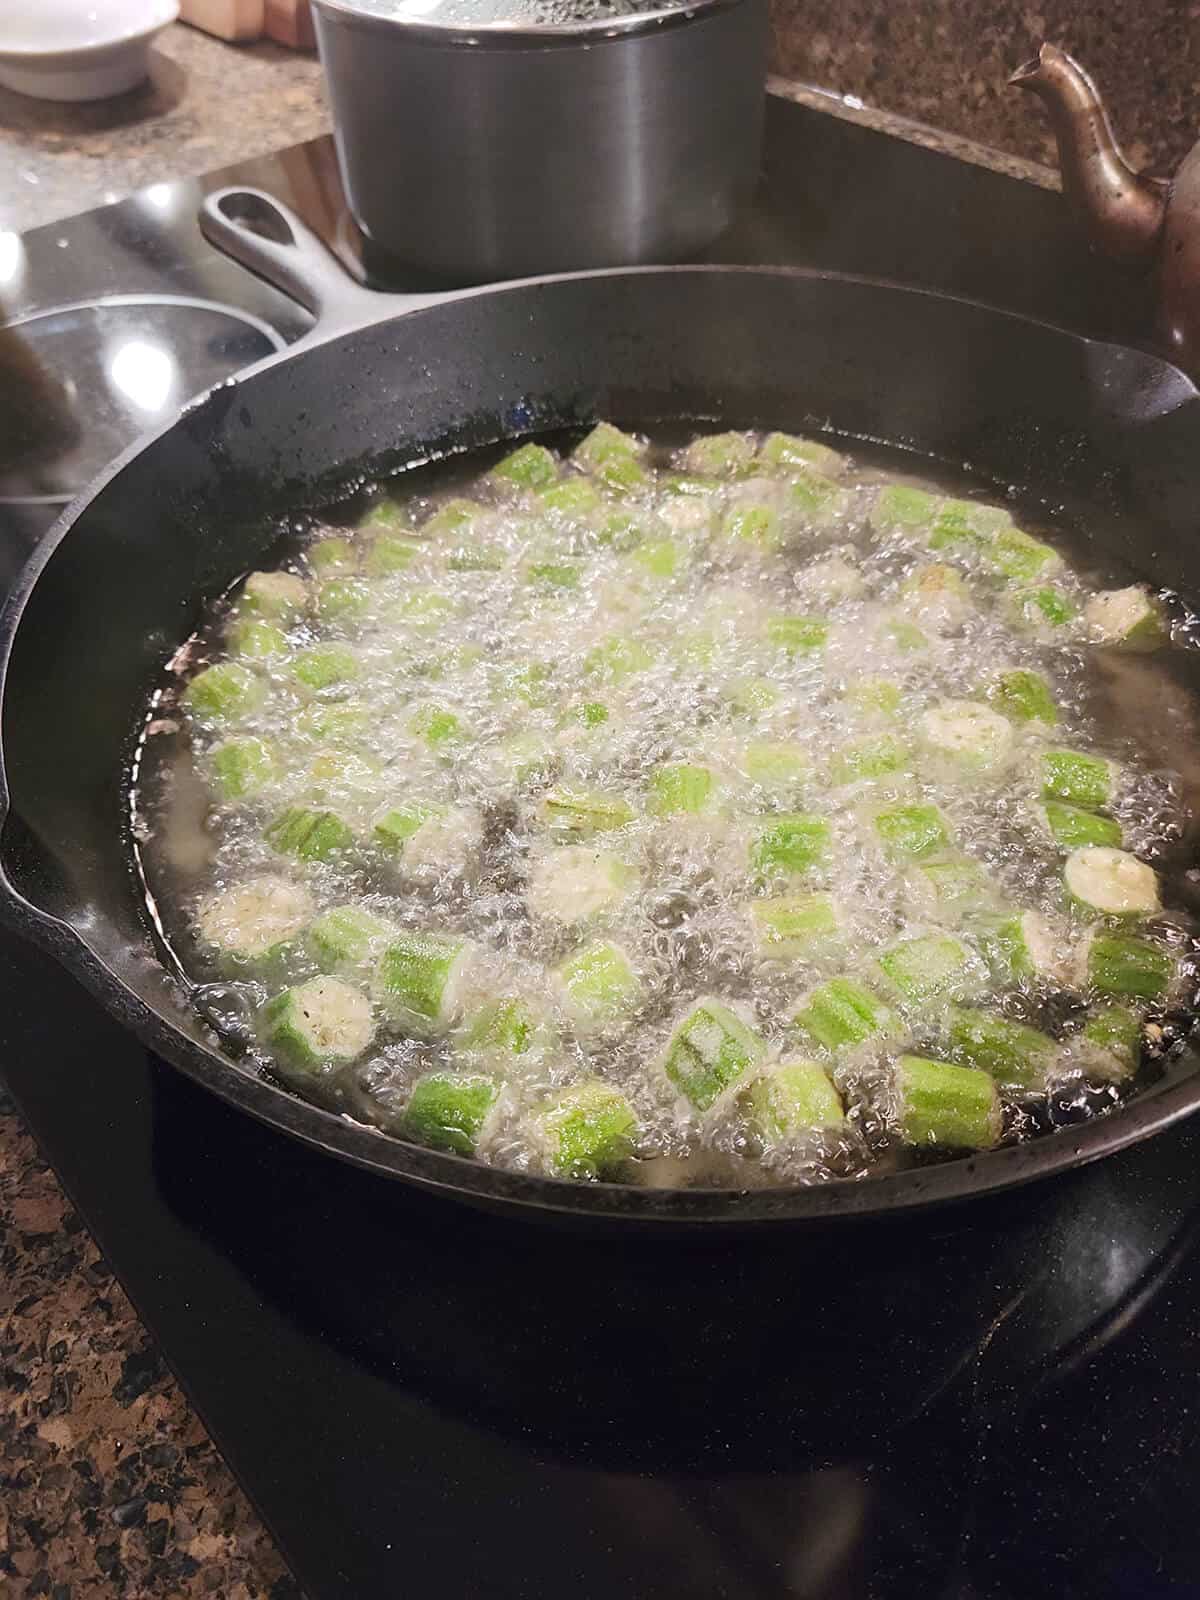 Okra about mid way through the frying process.